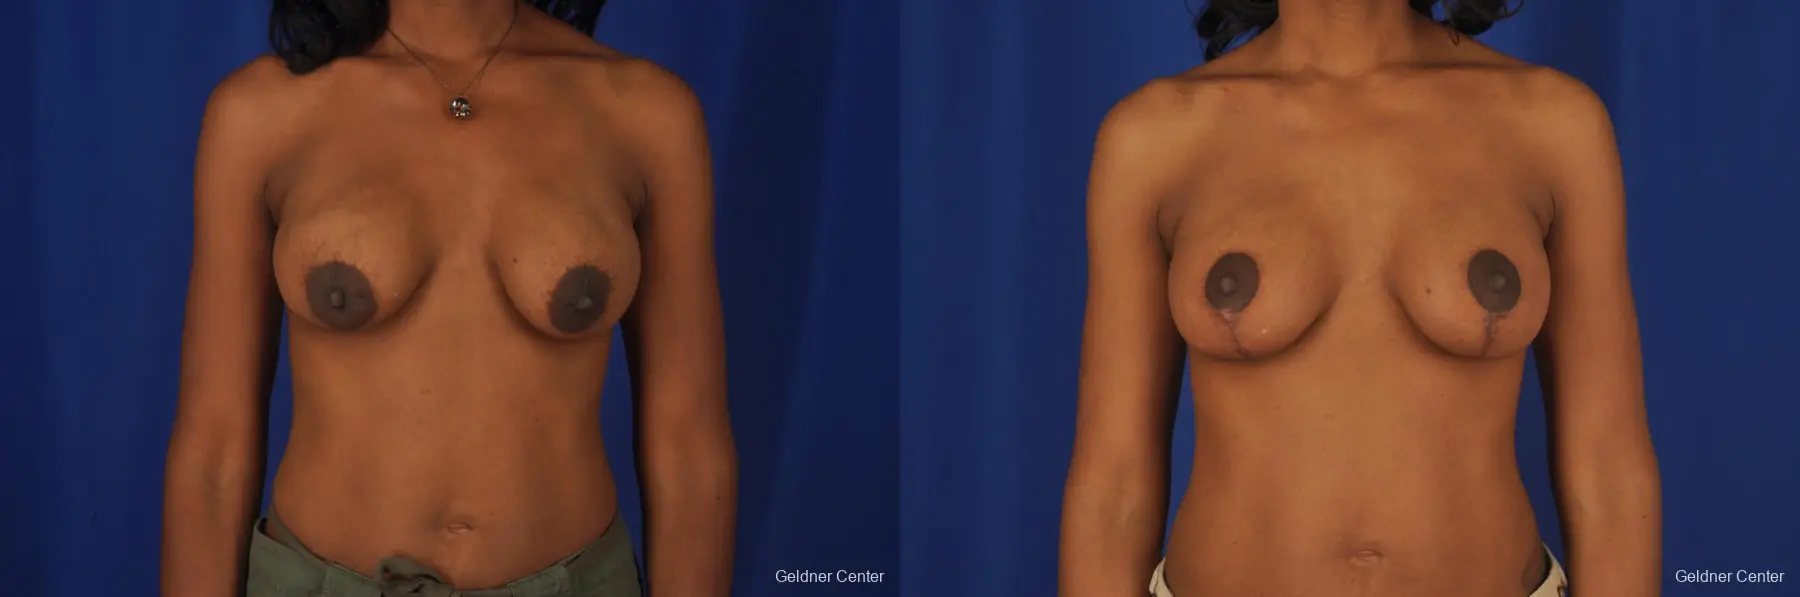 Breast Lift Streeterville, Chicago 2379 - Before and After 1